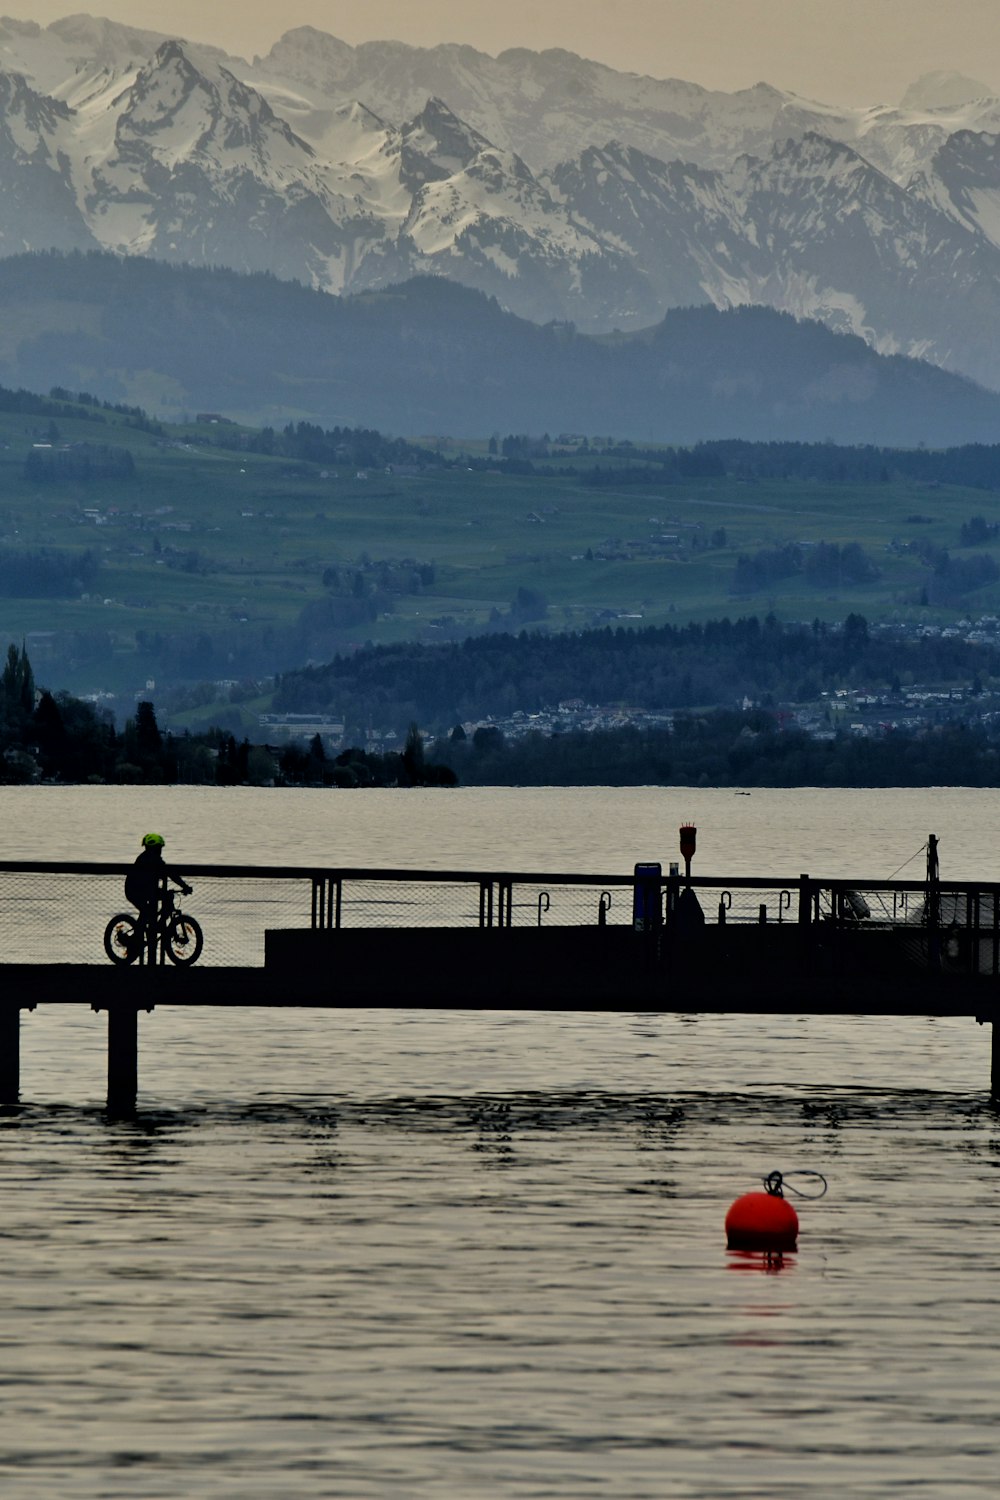 a person riding a bike on a bridge over a body of water